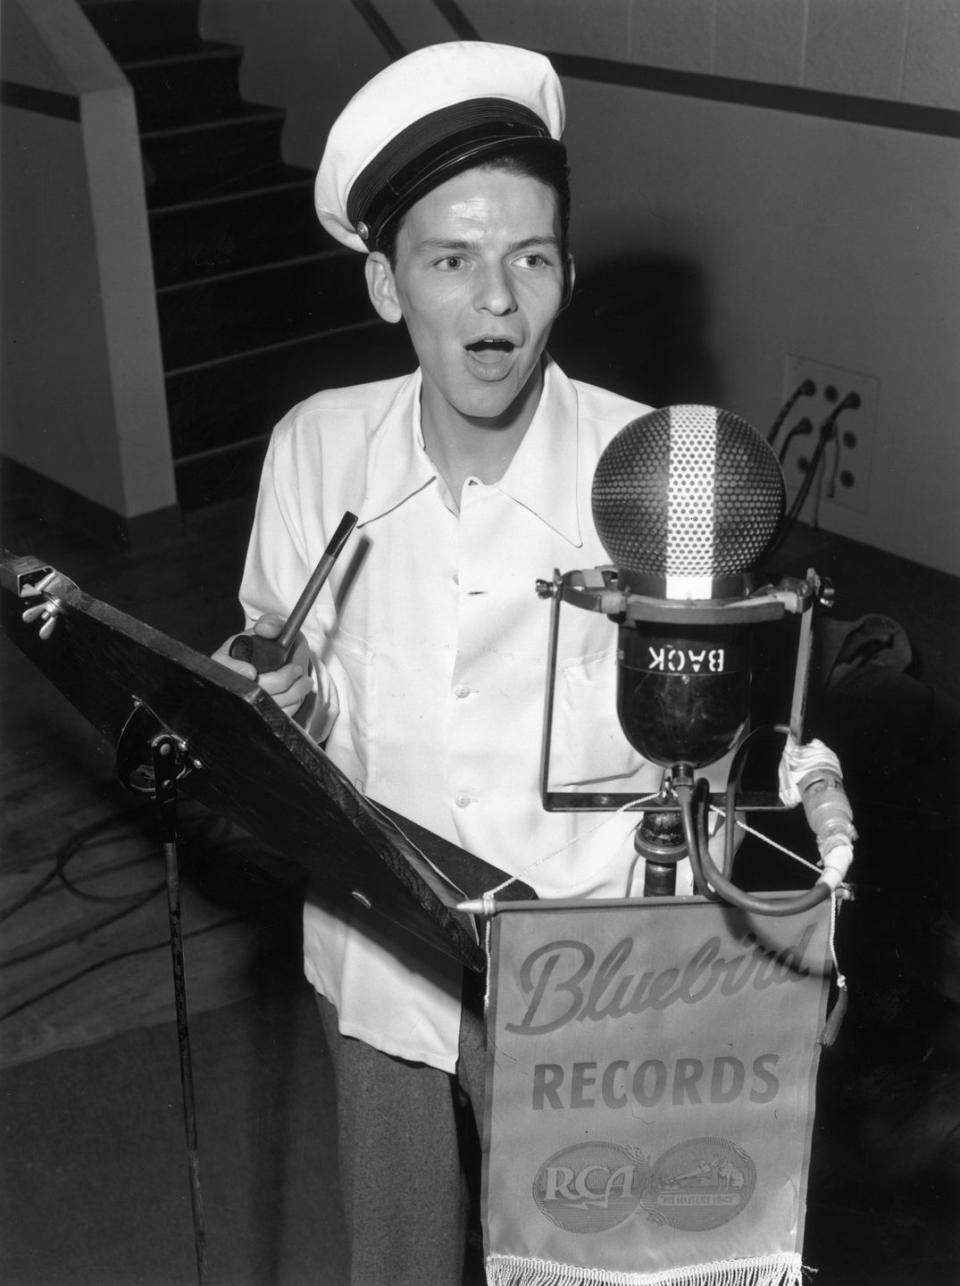 1943: The Start of a Solo Career